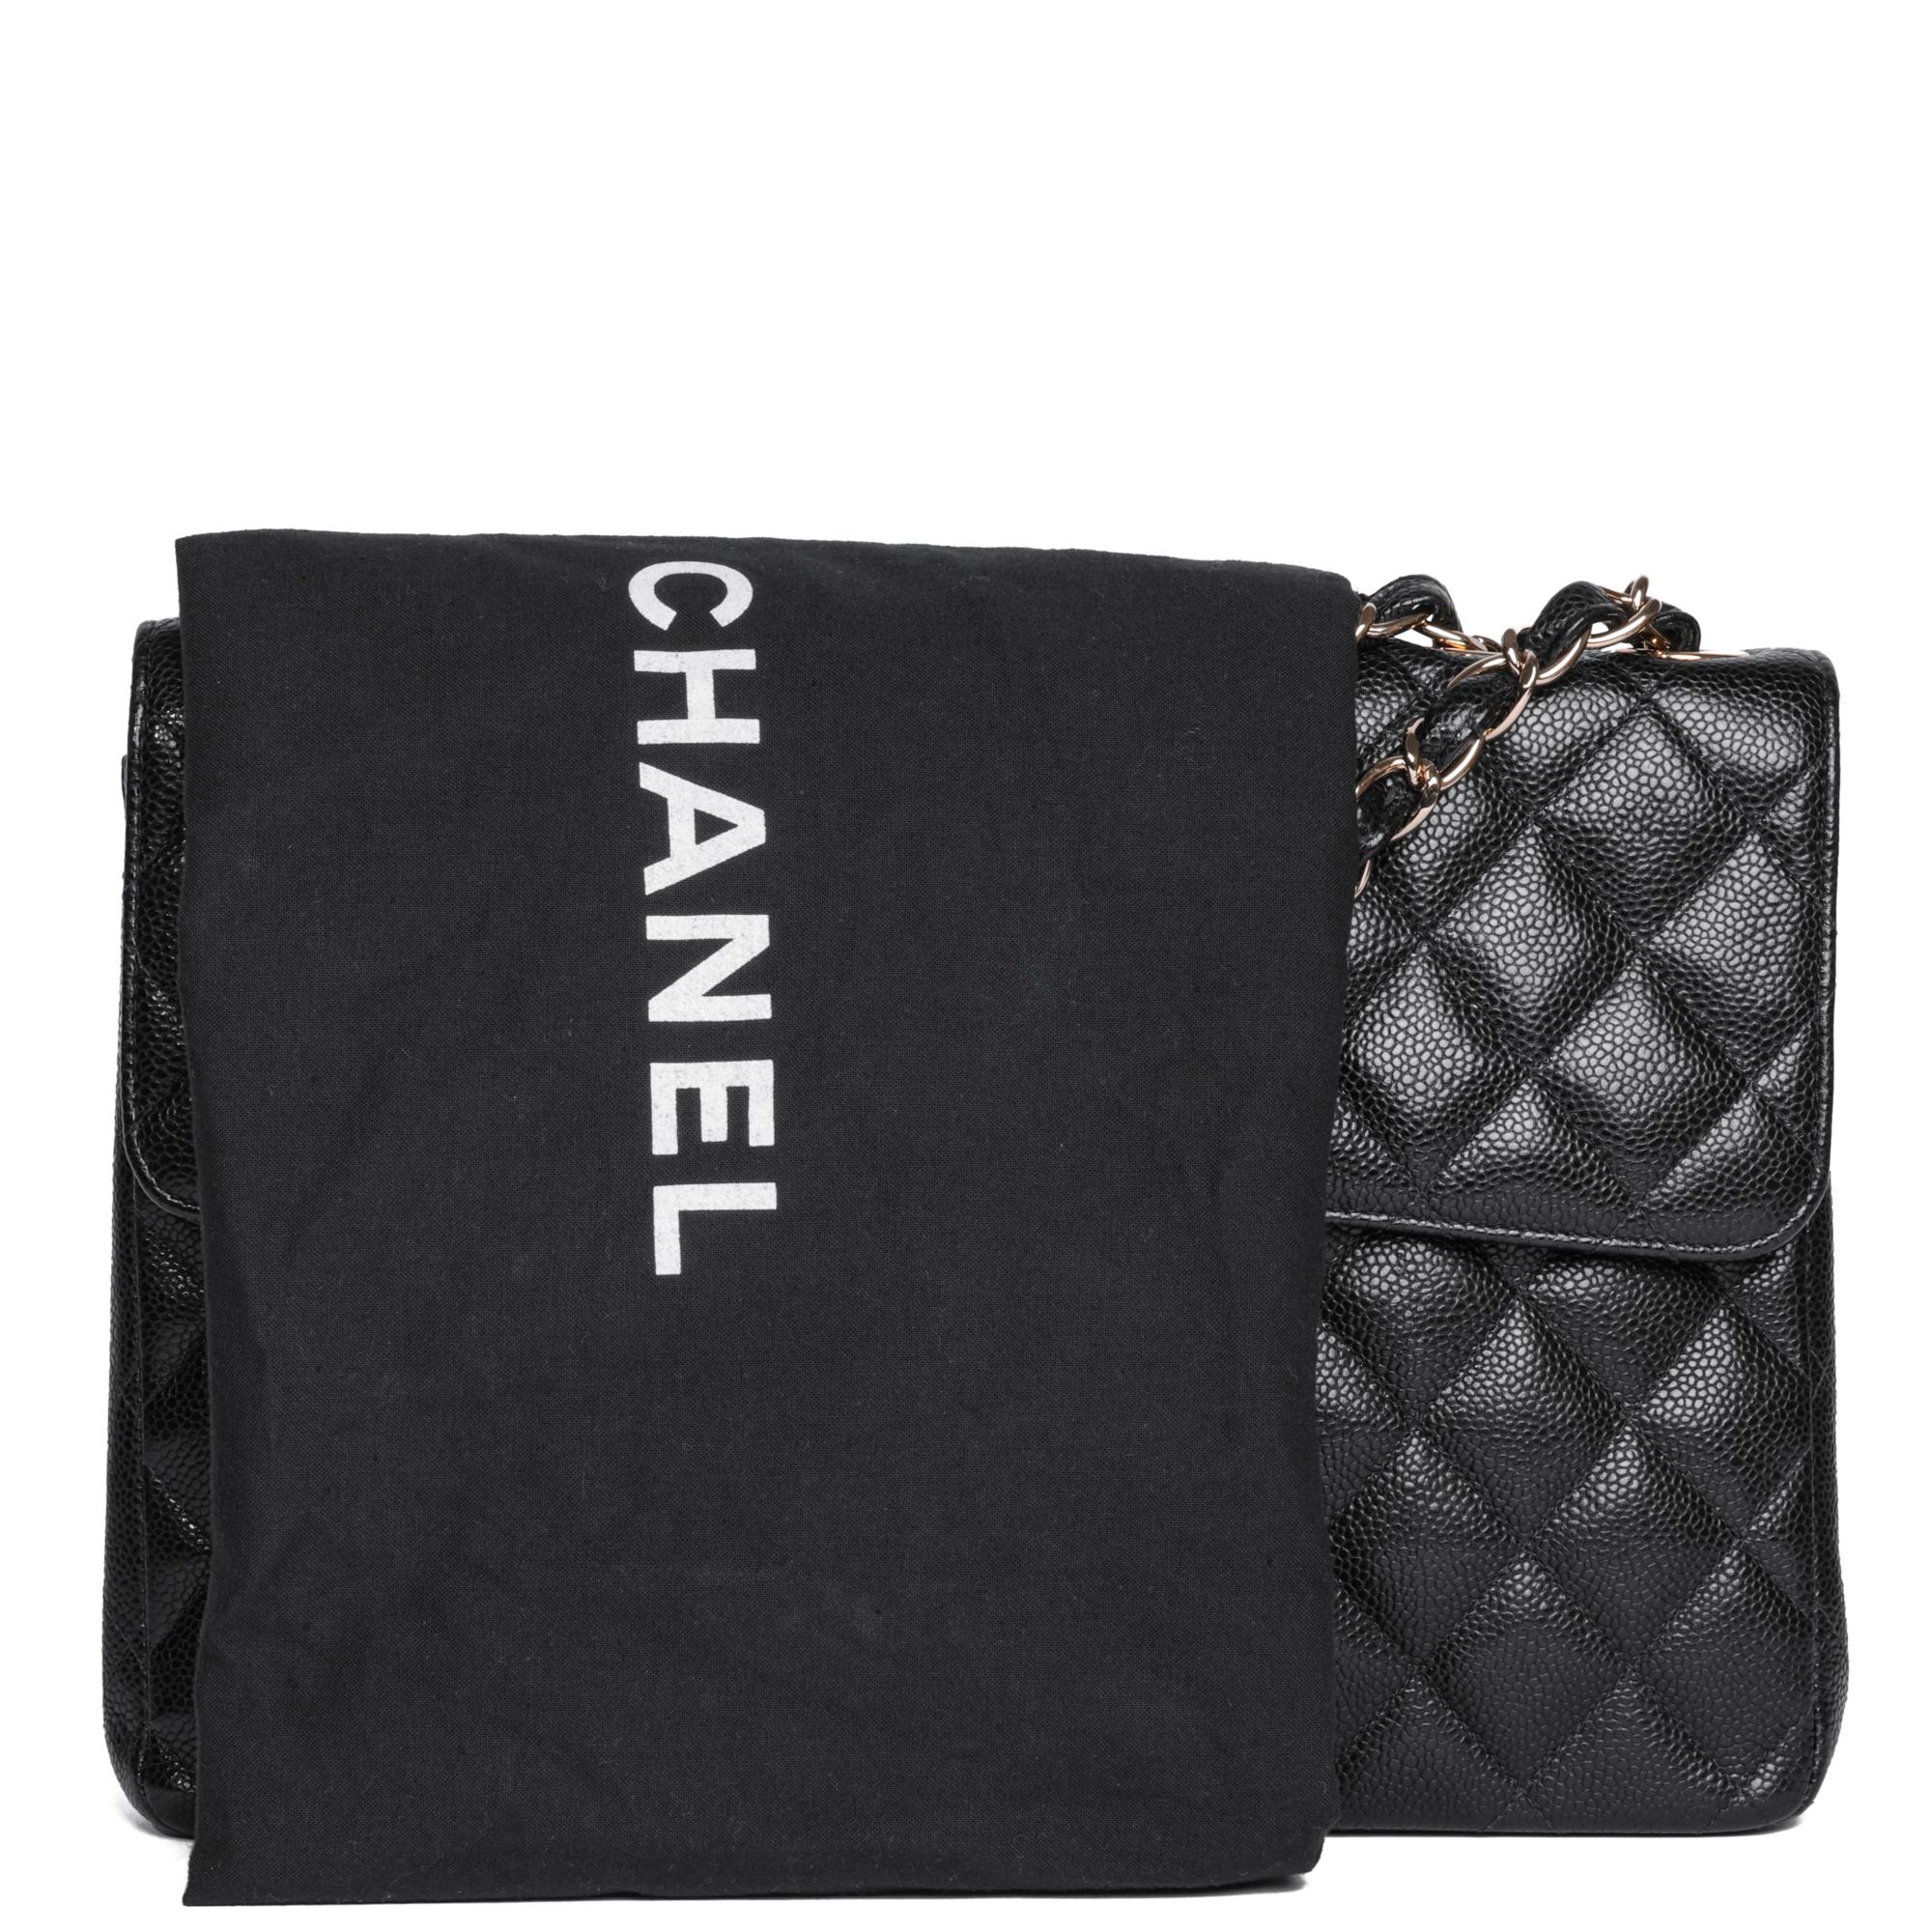 Chanel Black Quilted Caviar Leather Vintage Jumbo Classic Single Flap Bag 8